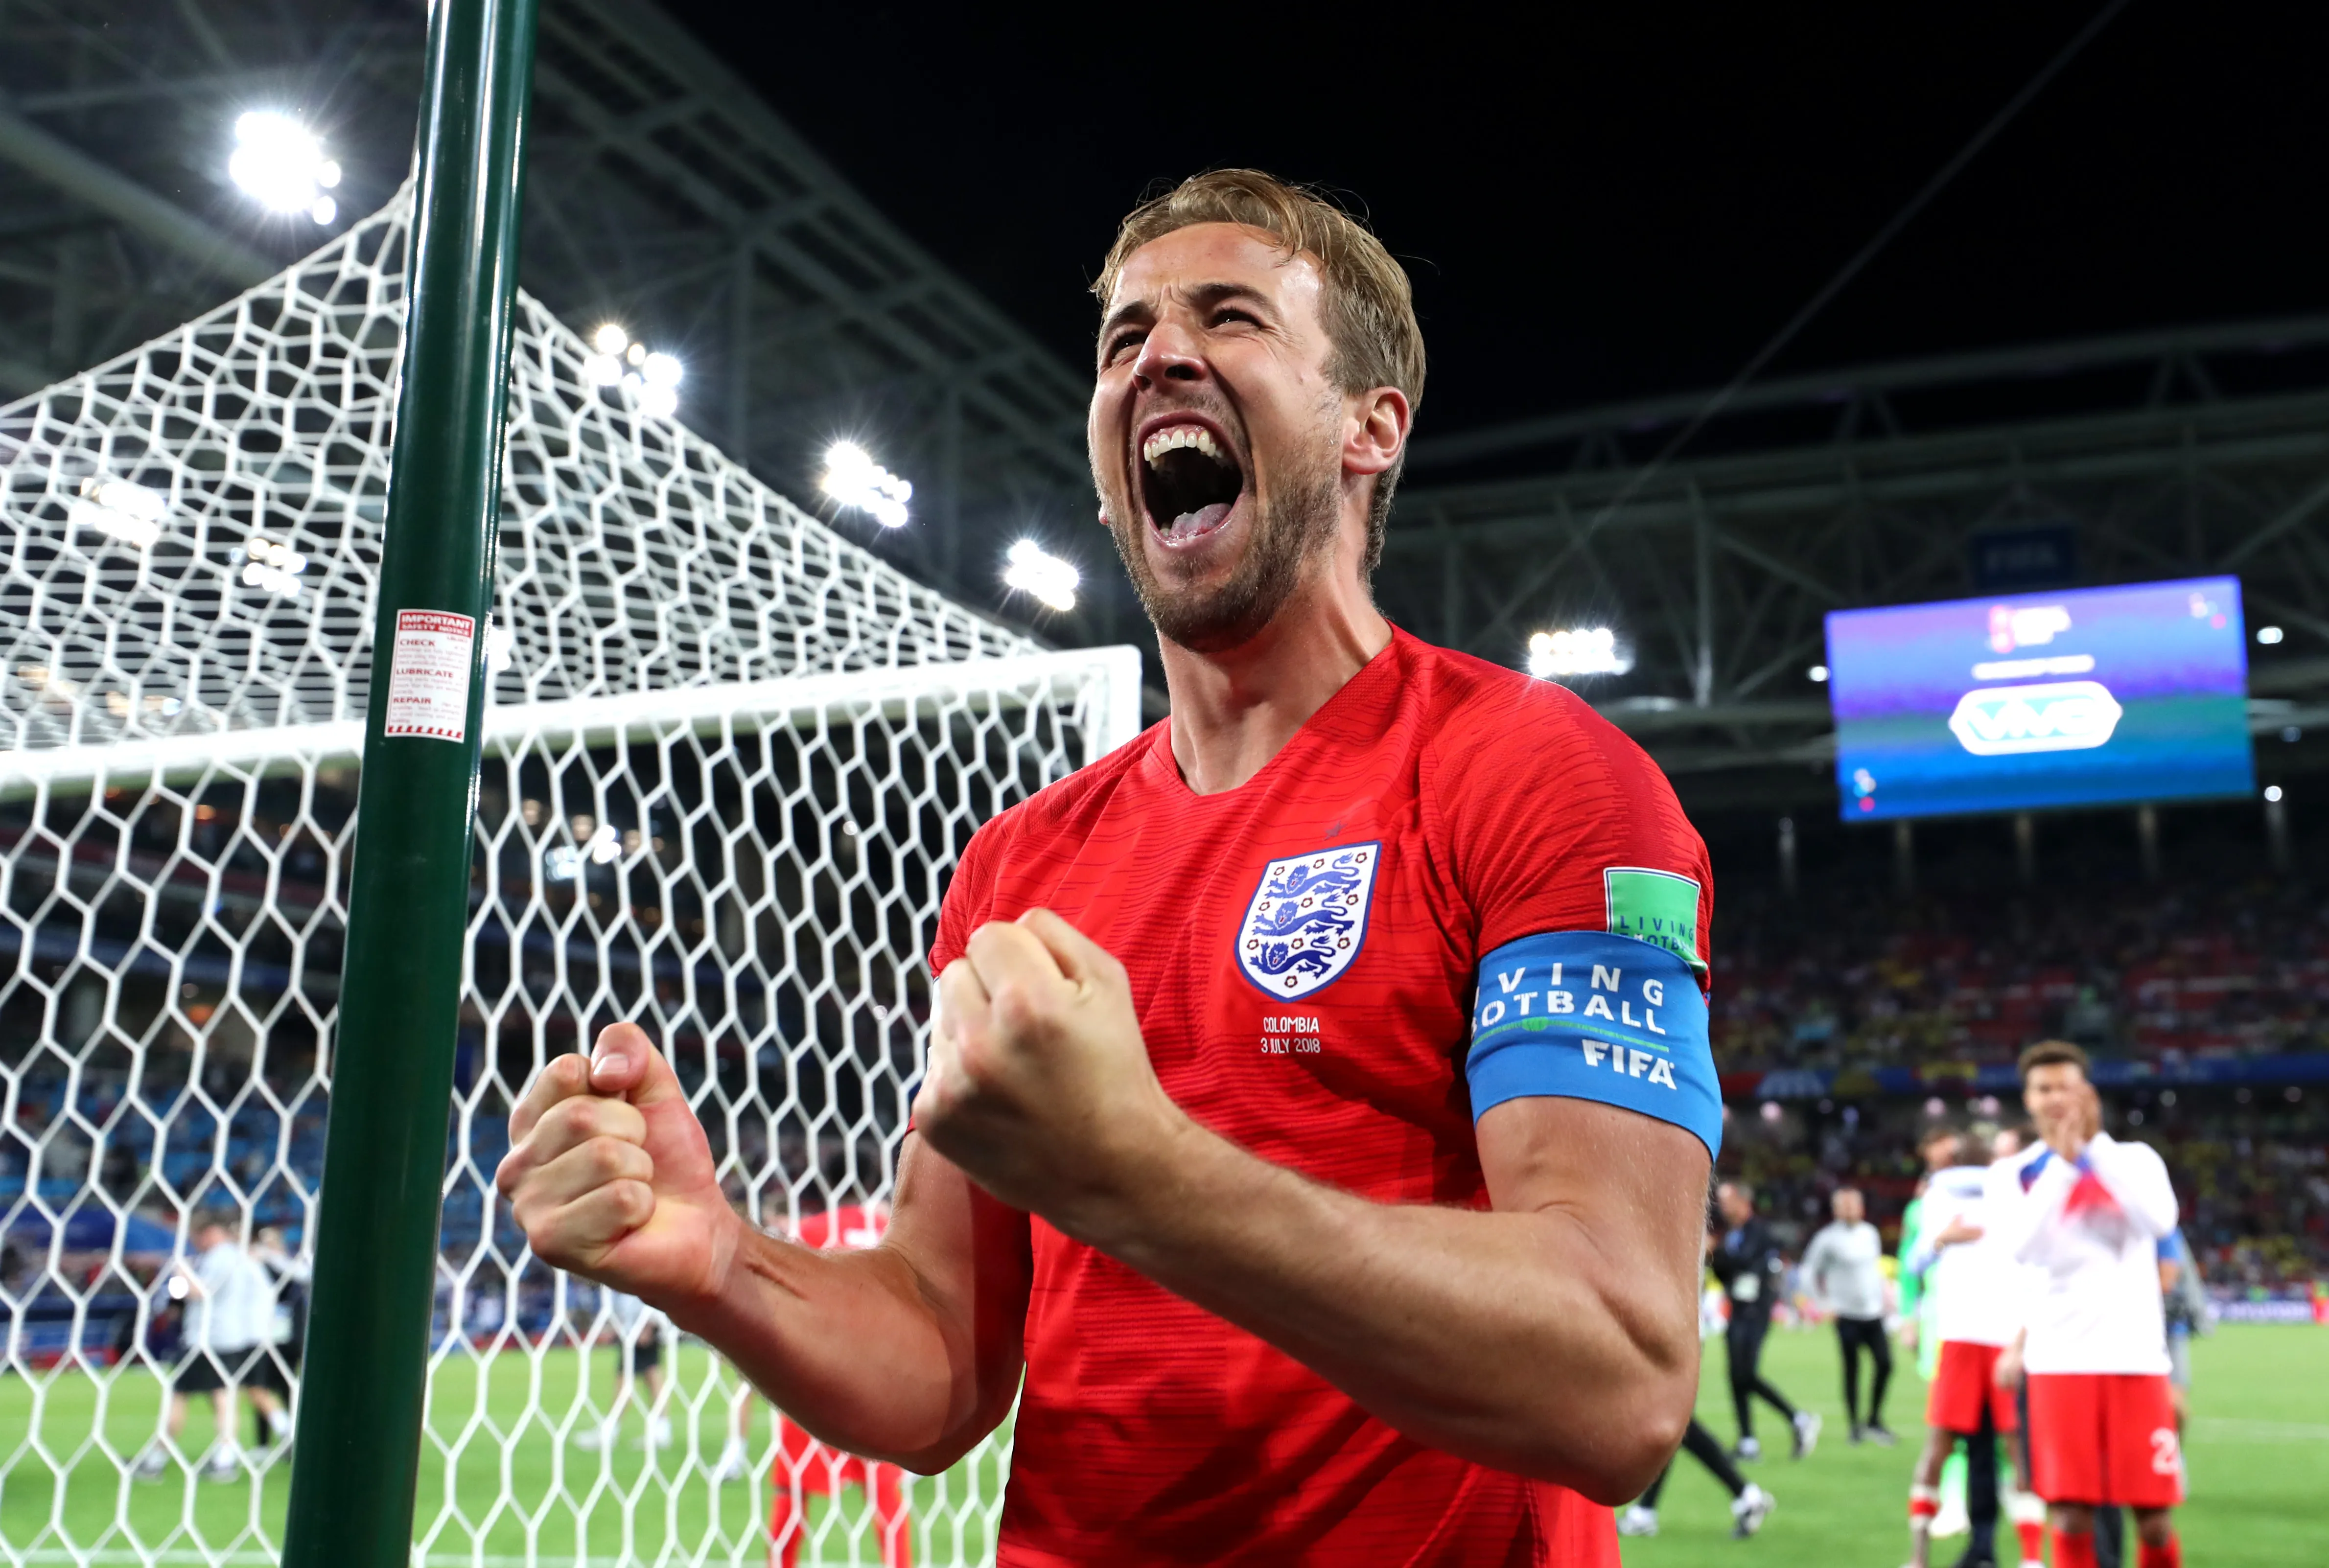 English Soccer Star Harry Kane's Net Worth Is Skyrocketing. Here's How He Makes and Spends His Millions